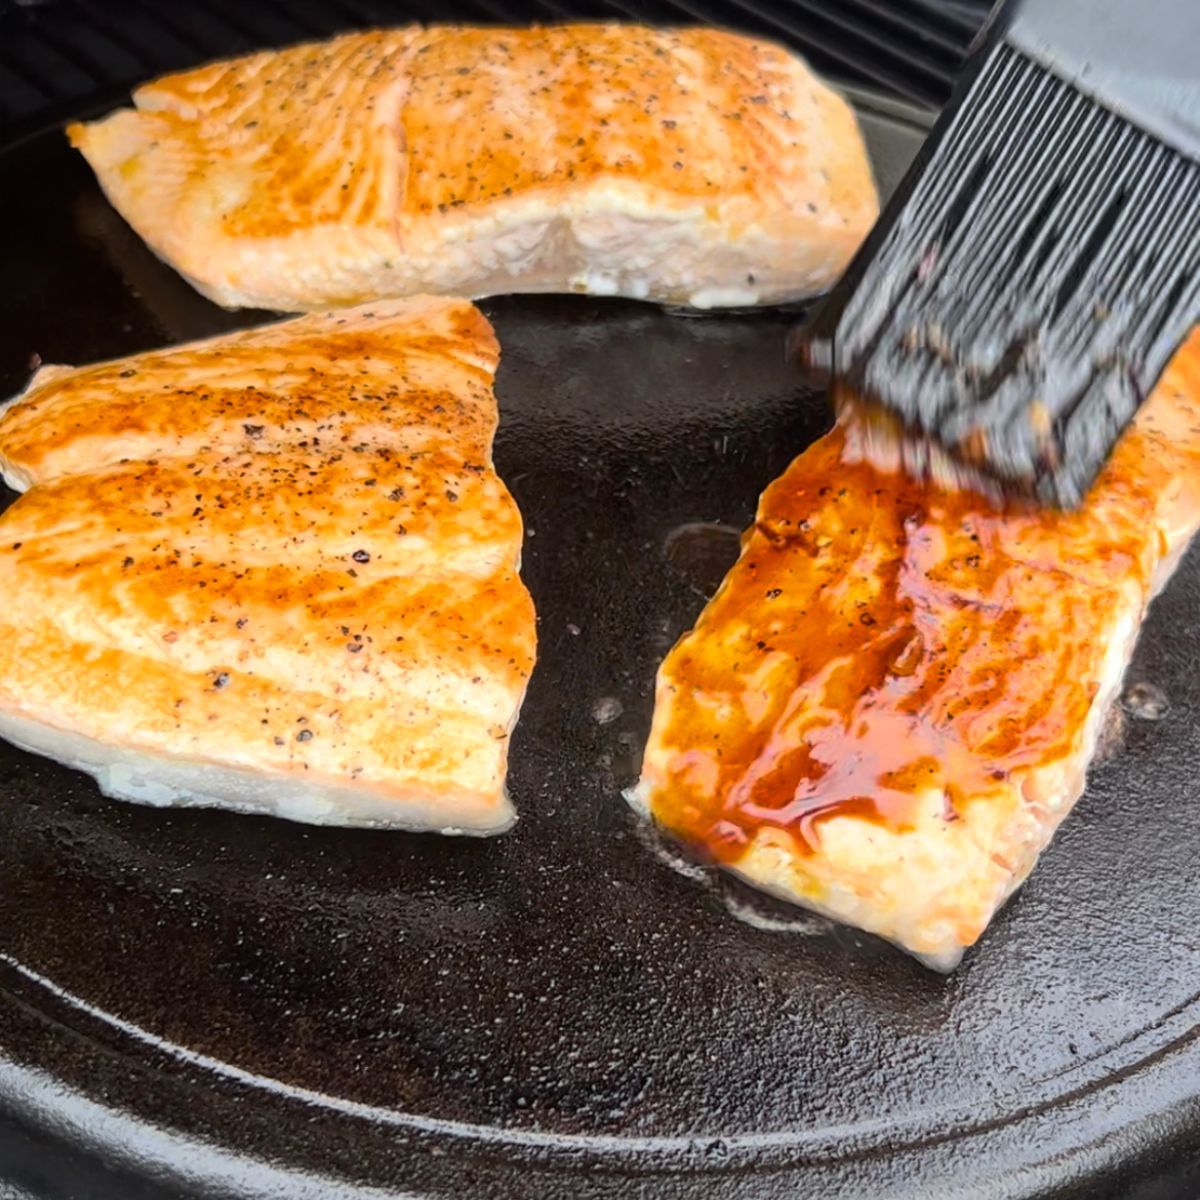 Step 4 - Sear salmon on the Plancha, flesh side down until a crispy crust forms (3-4 minutes).